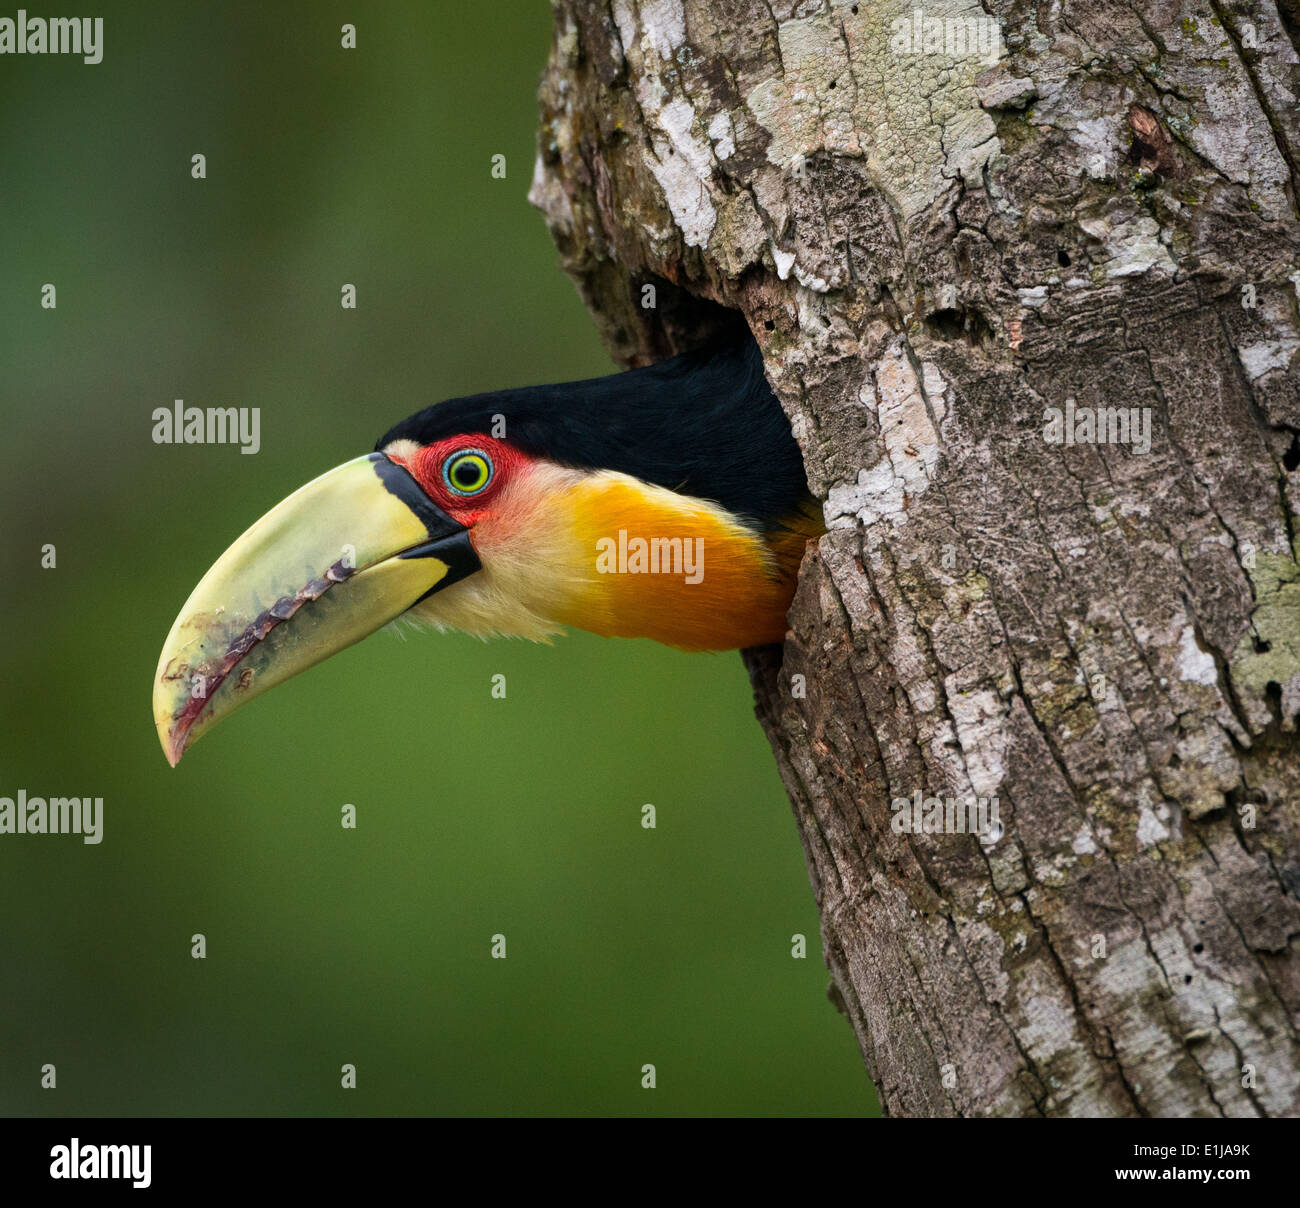 Red-breasted Toucan (Ramphastos dicolorus) in its nest. Stock Photo